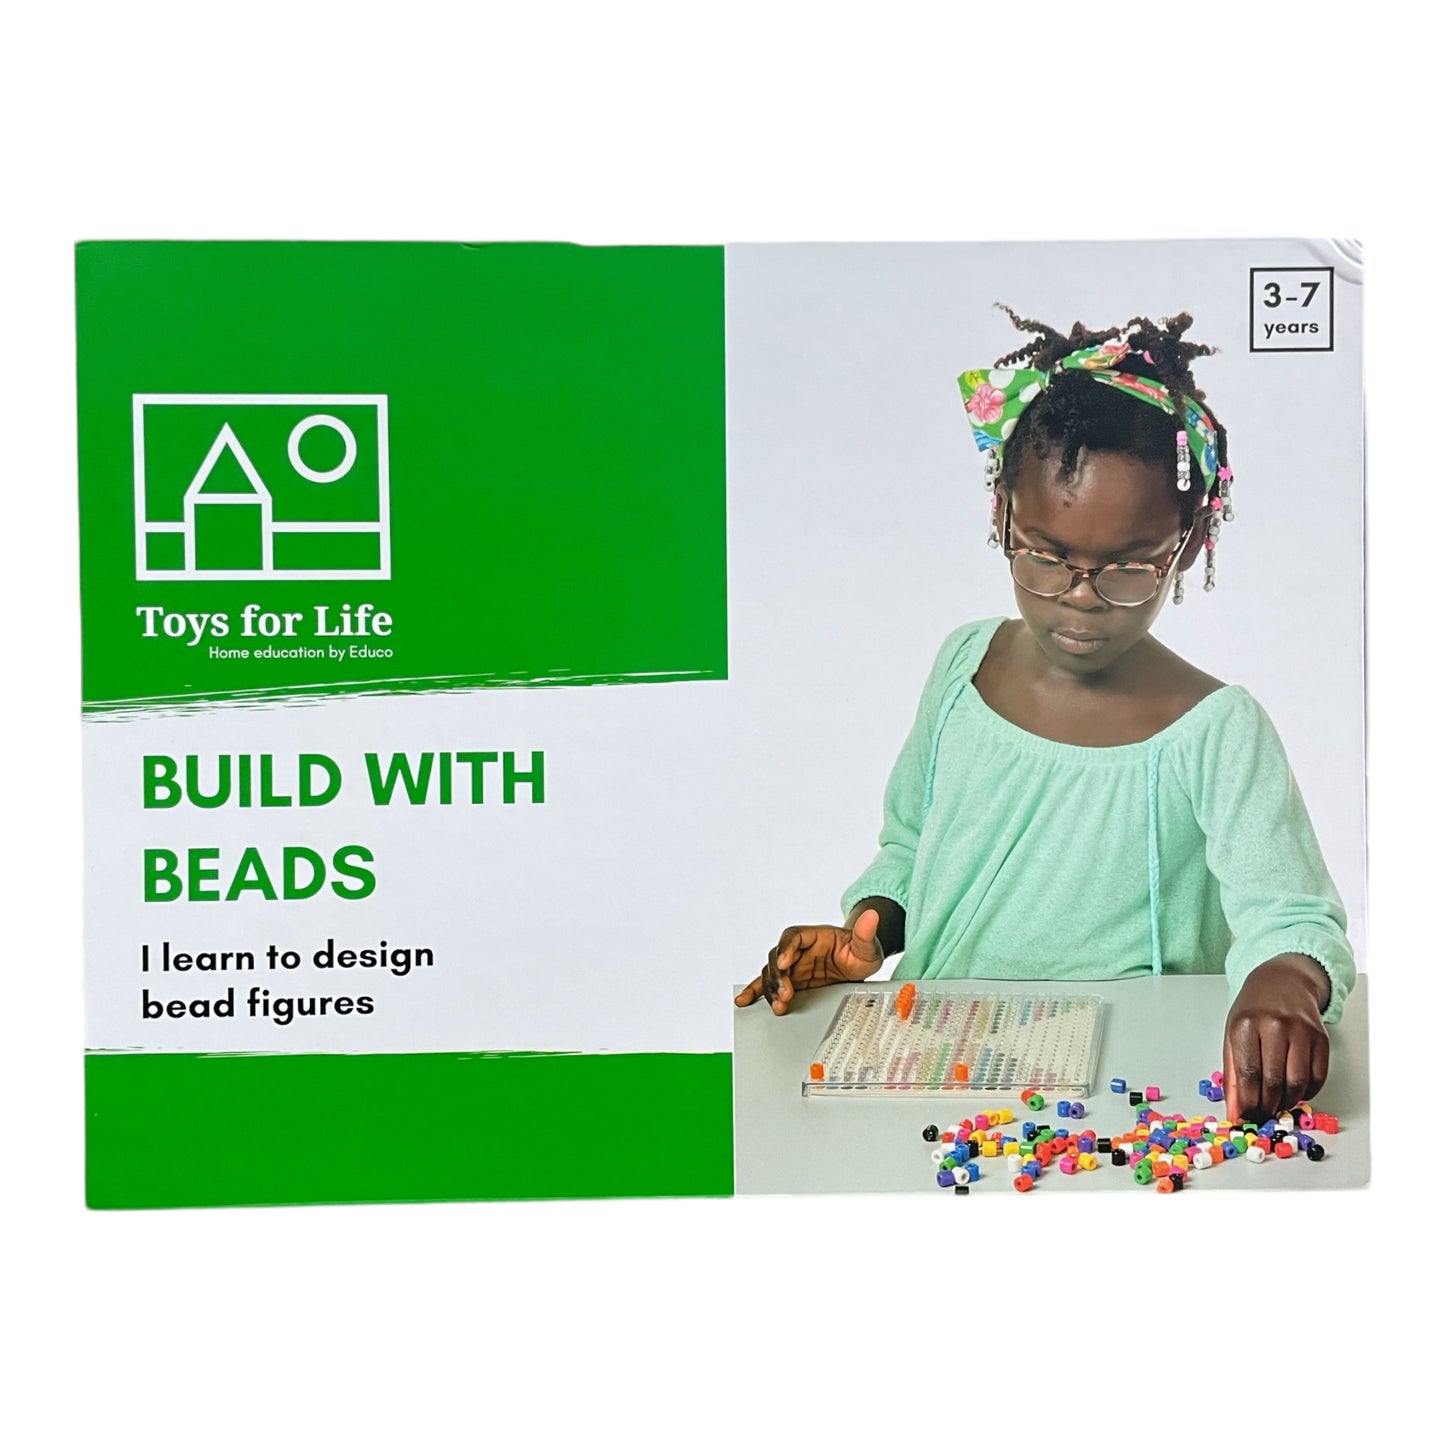 Educational Game Toys for Life - Build with Beads